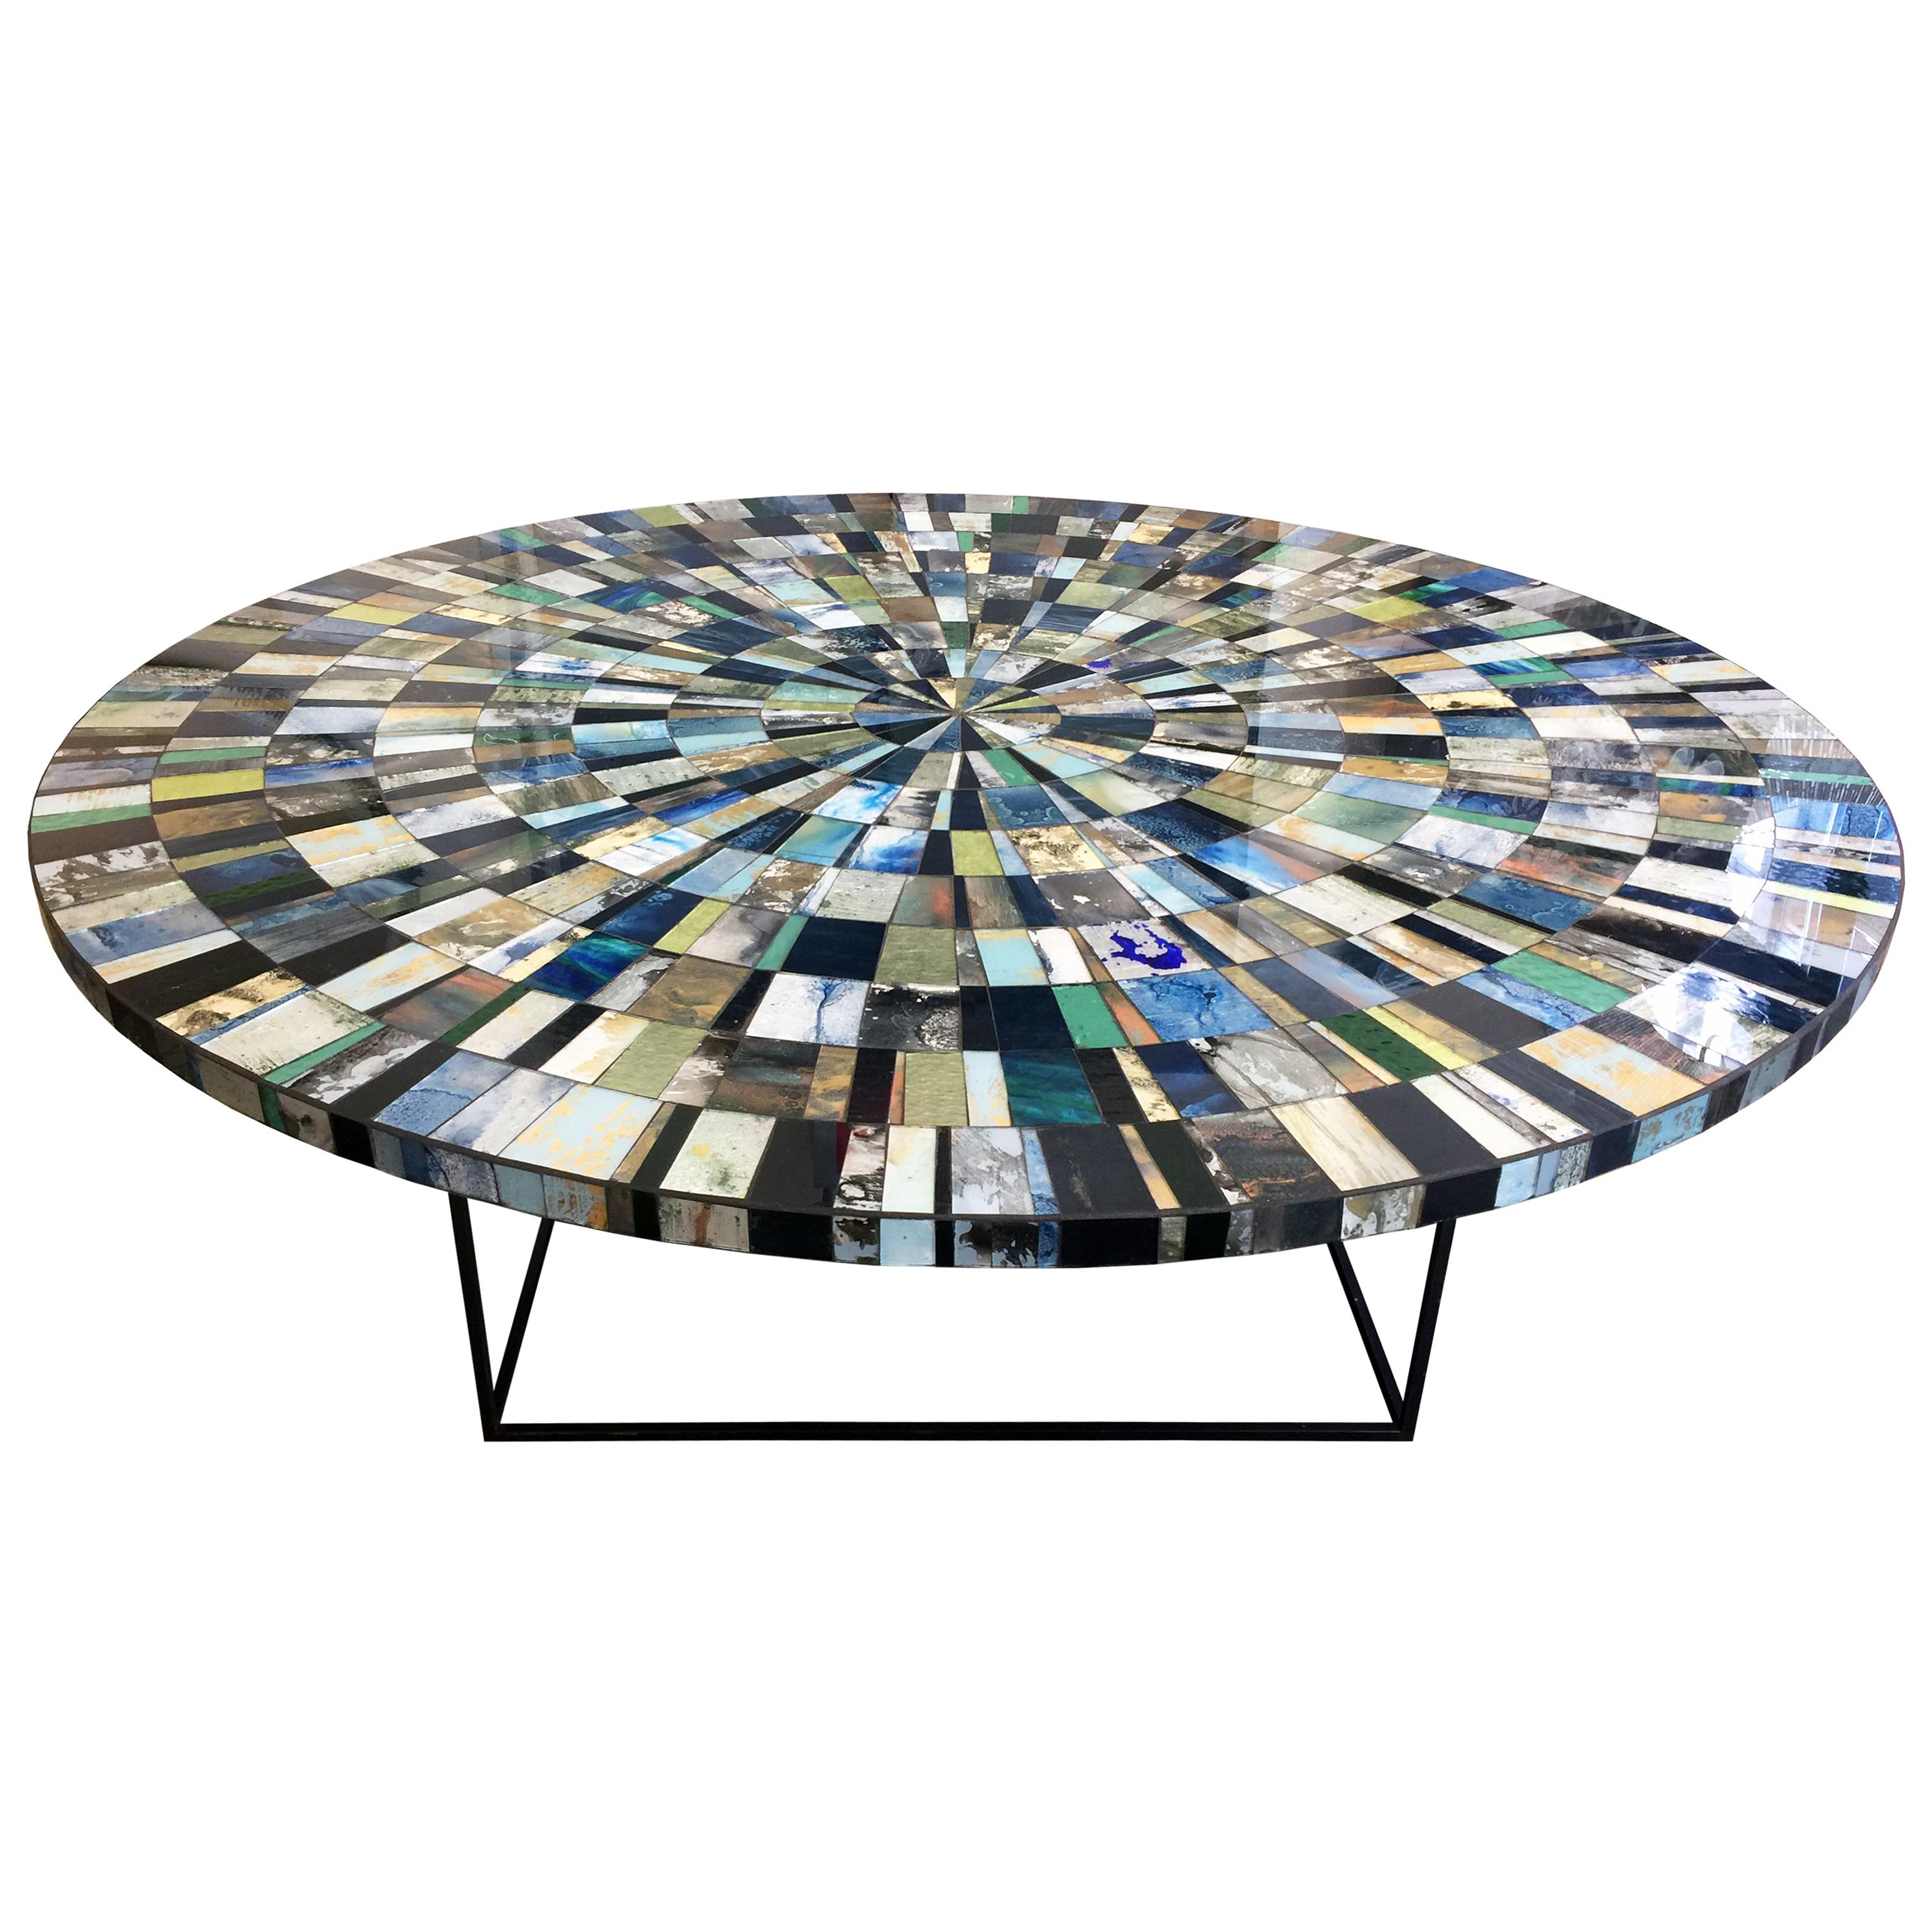 Modern Eglomise Glass Mosaic Round Aqua Coffee Table by Ercole Home